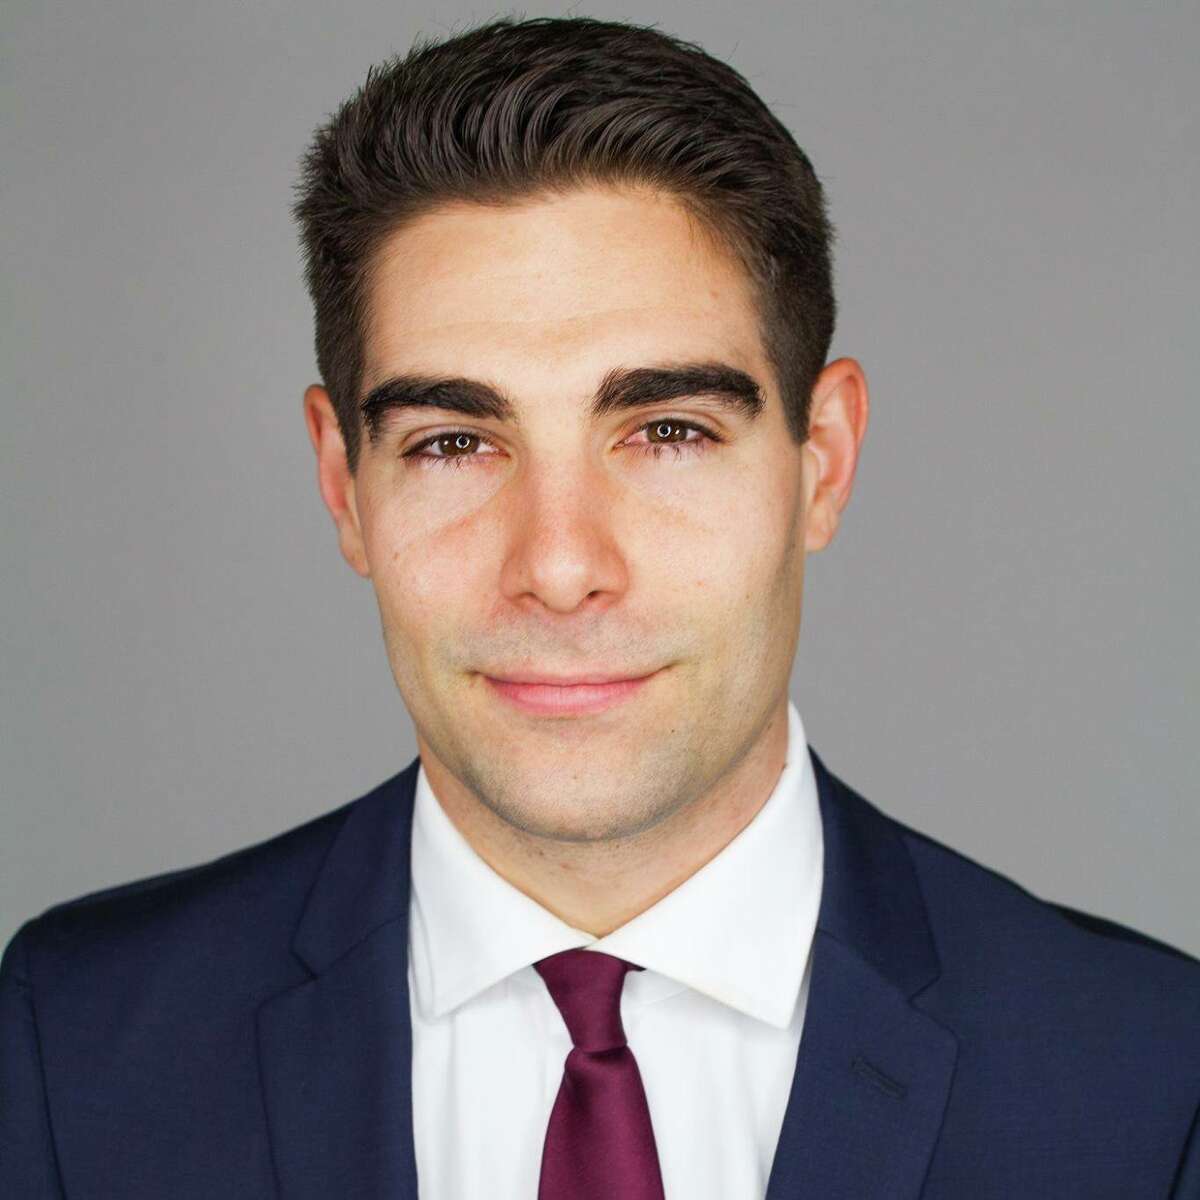 >>> 2019: Houston TV anchors and reporters on the move ... Vincent Crivelli  January 2019  Vincent Crivelli joined KPRC Channel 2 from a South Florida TV station.RELATED: Meet Houston's newest TV reporter: KPRC's Vincent Crivelli